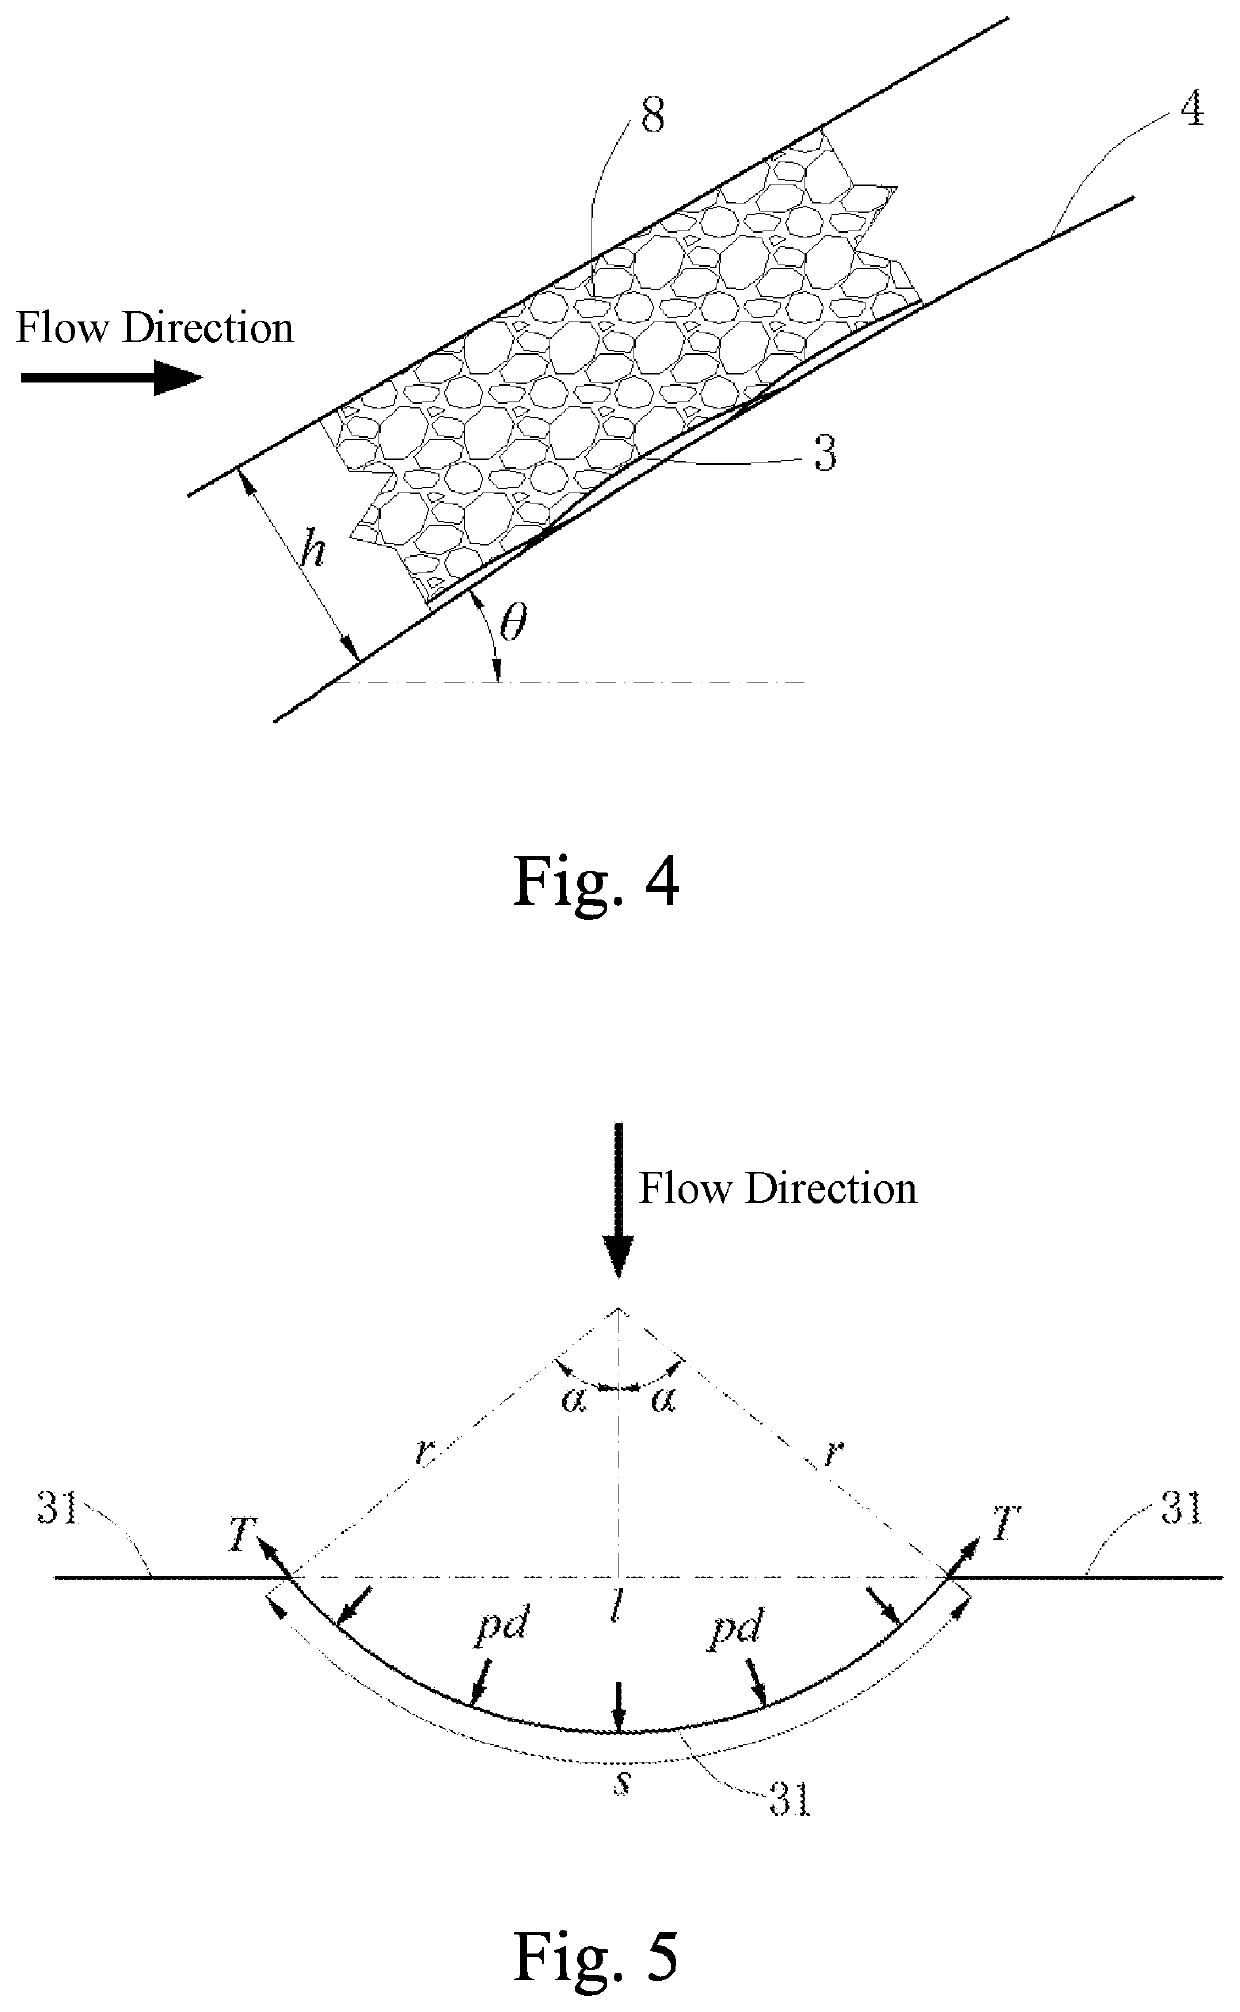 Method for regulating and controlling discharge flow of dammed lake